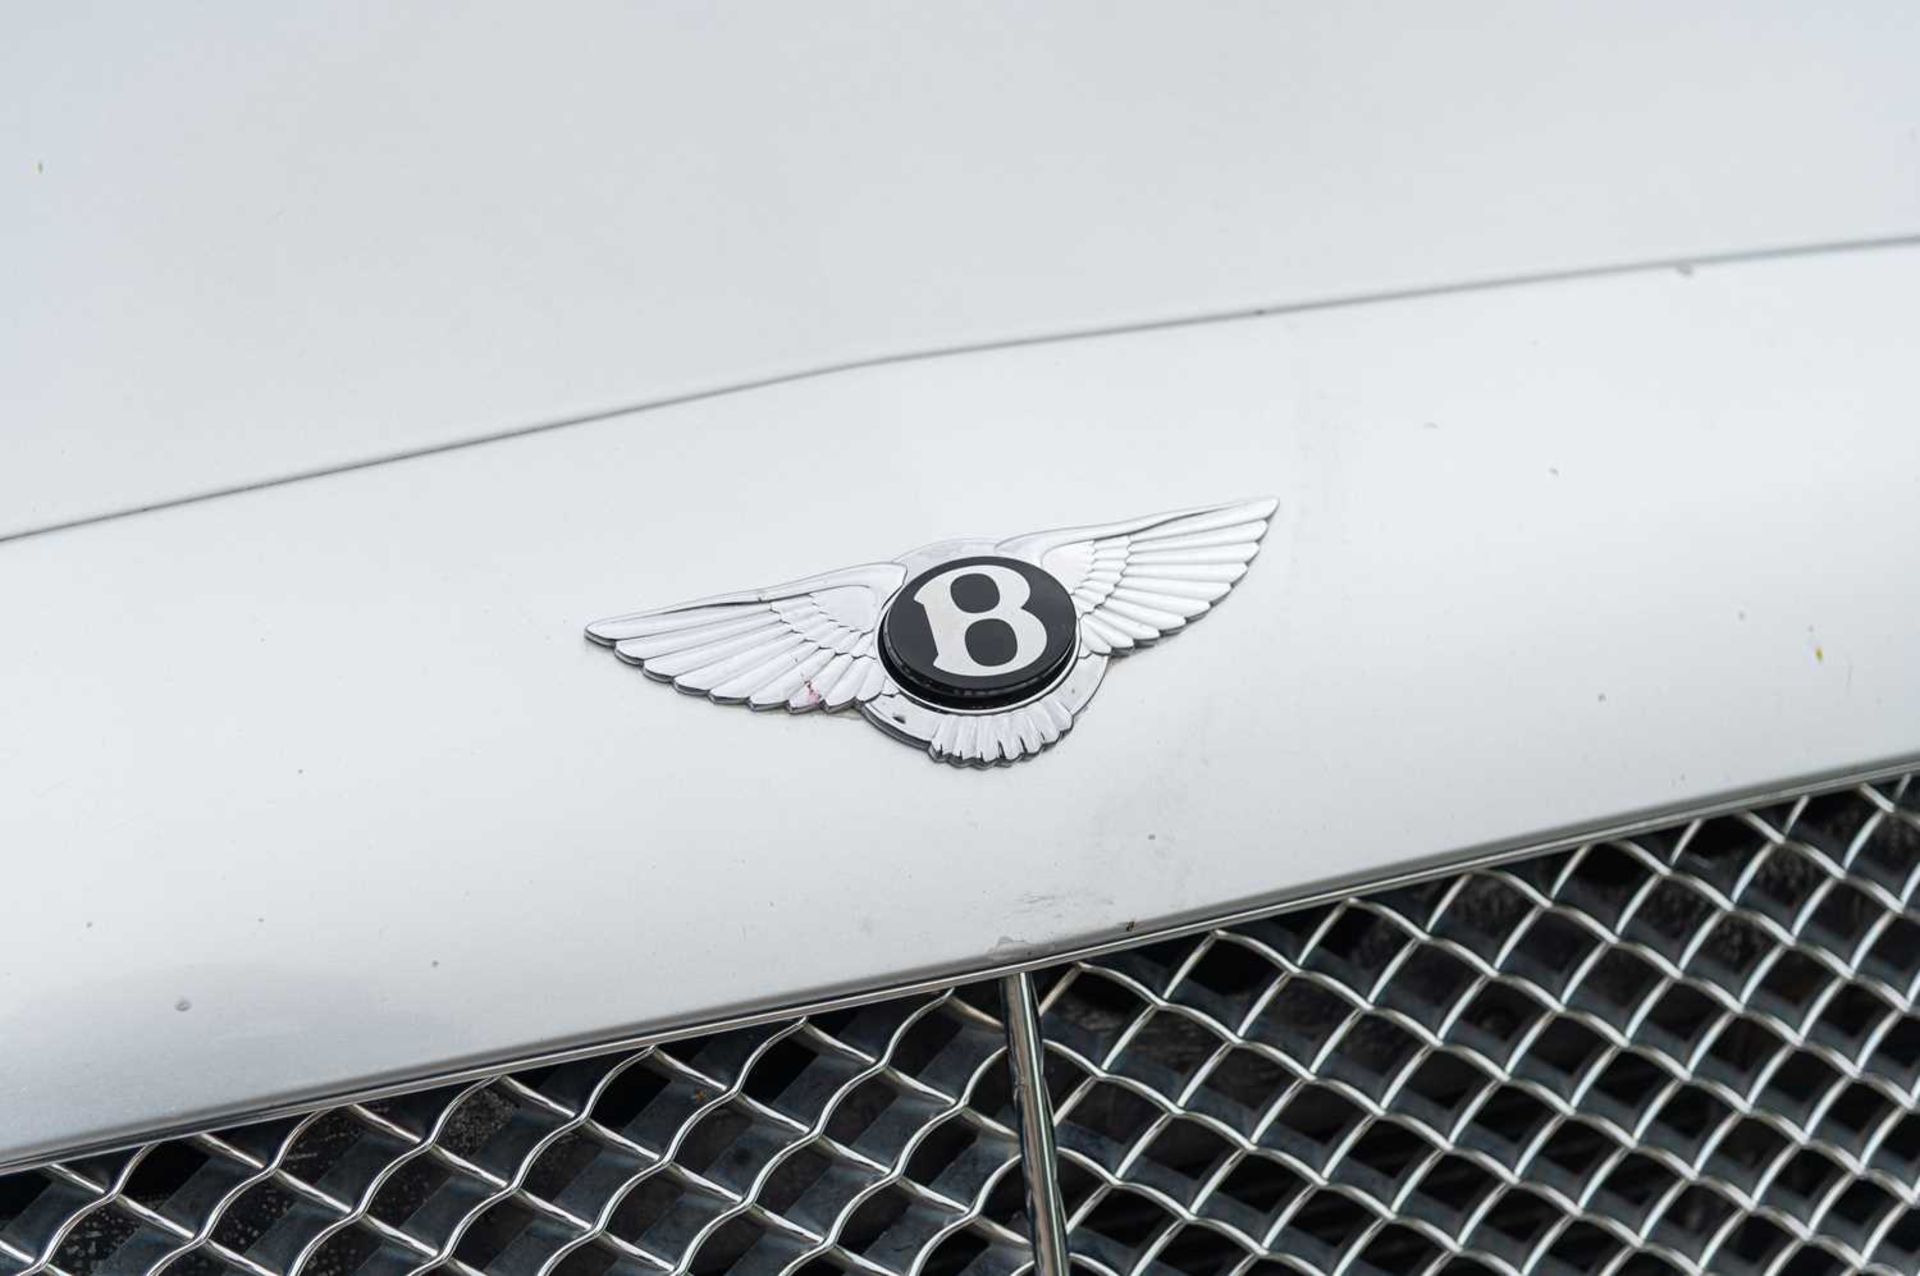 2005 Bentley Continental Flying Spur - Image 21 of 81